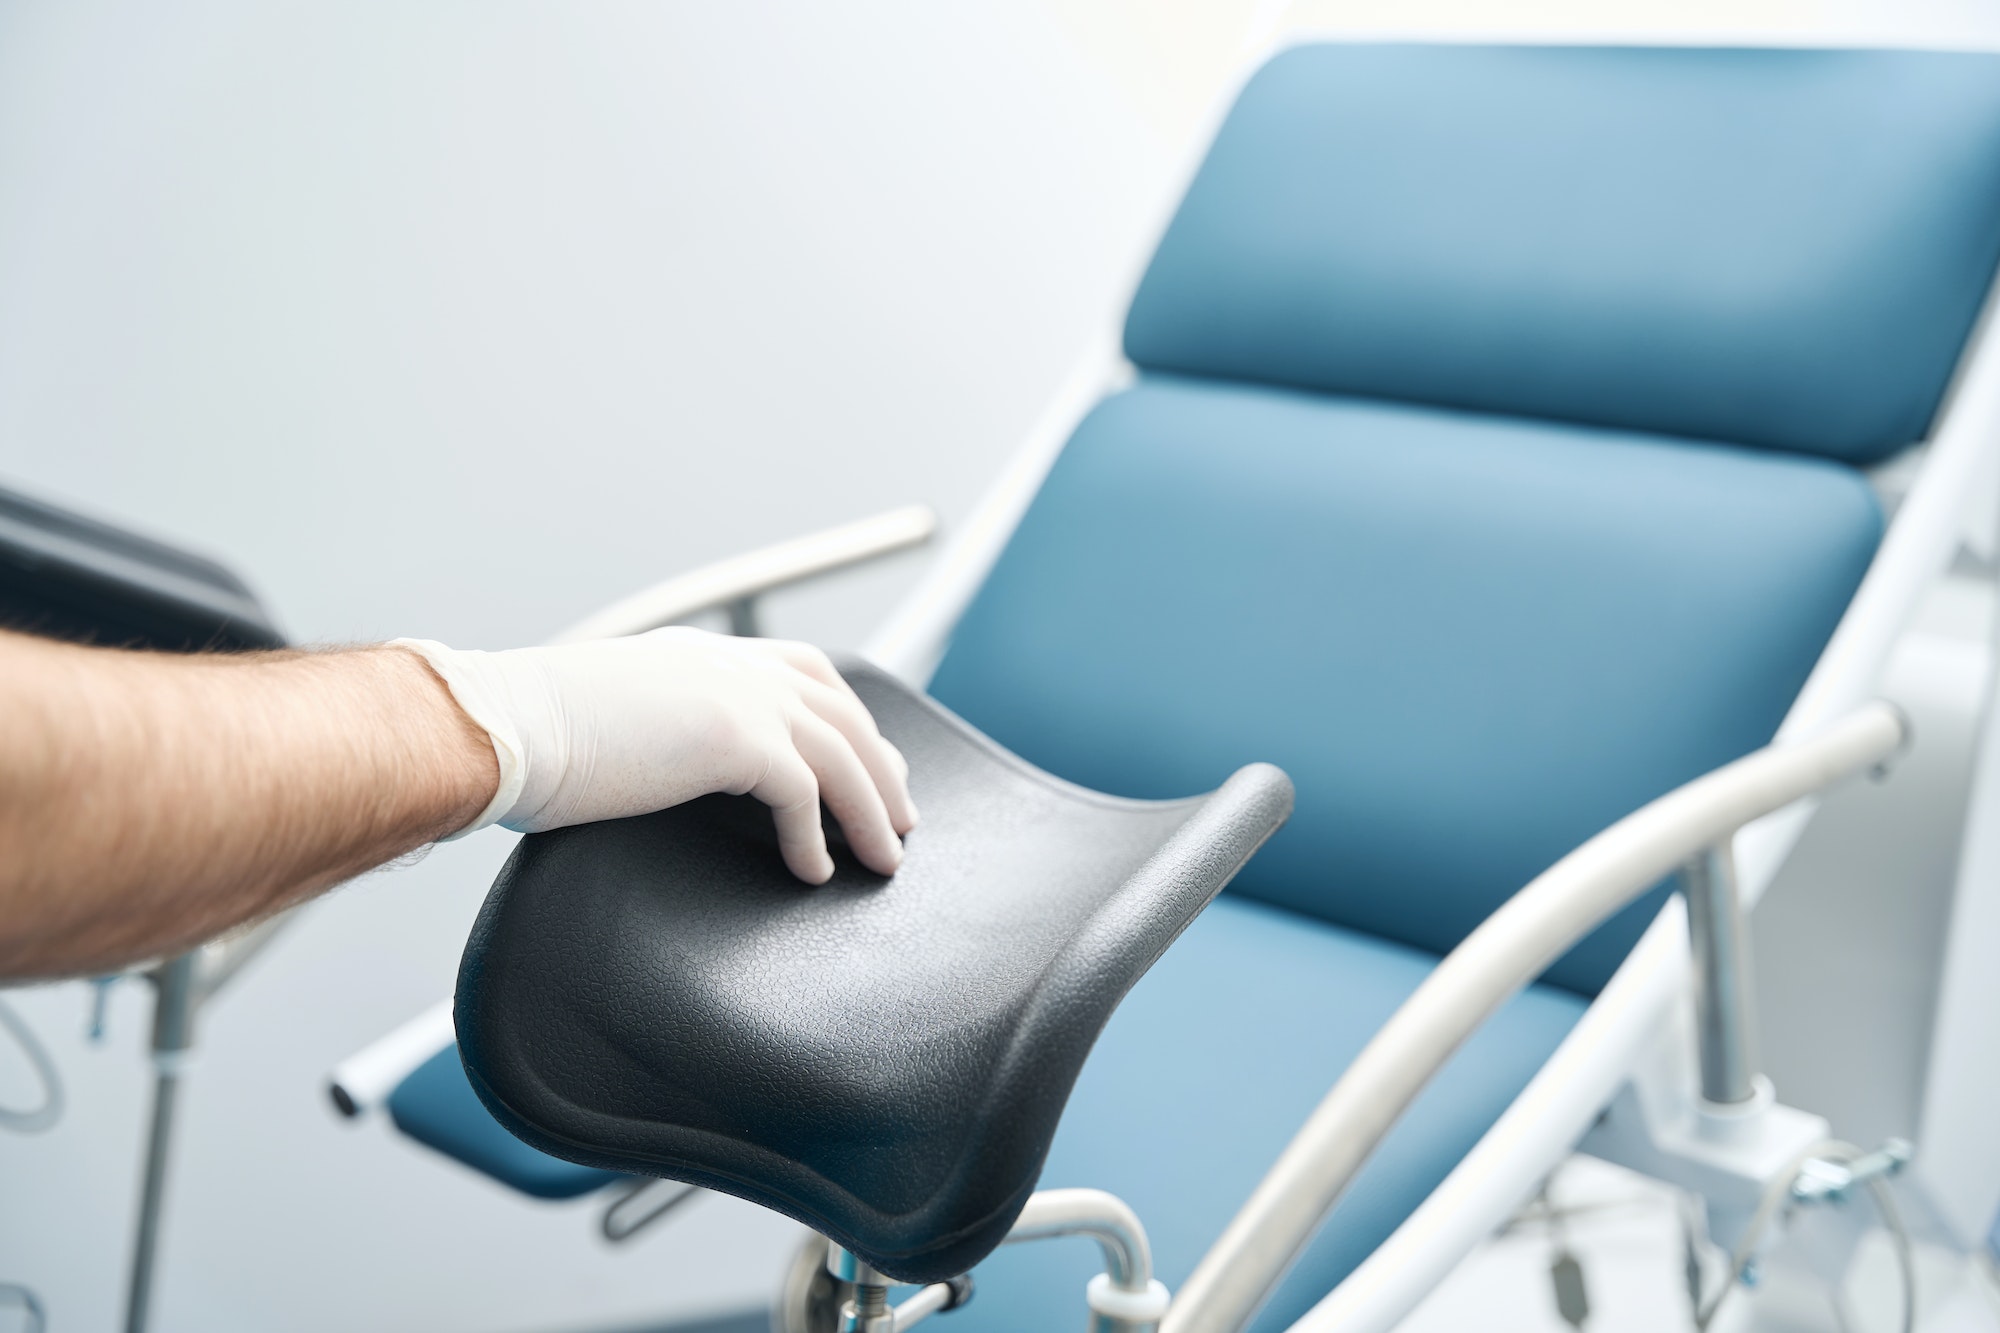 Gynecologist hand is touching the gynecological chair in the office